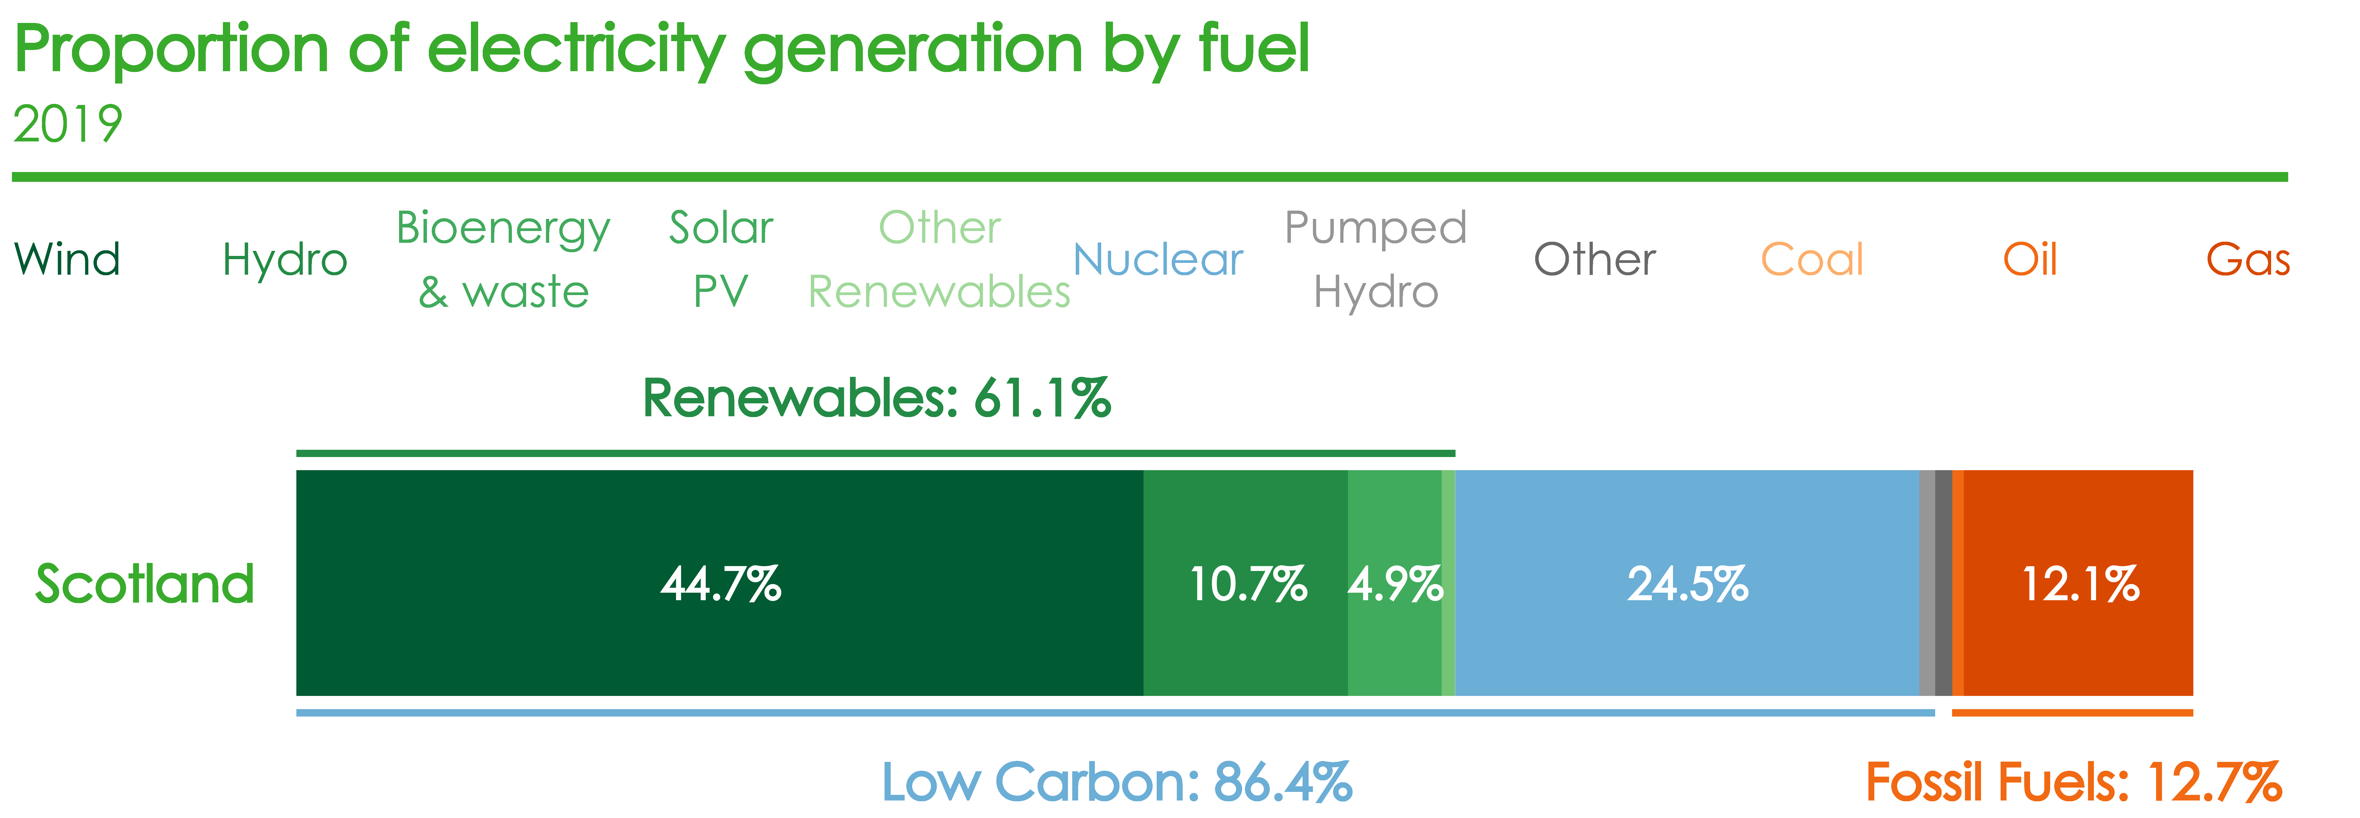 In 2019 the majority (86%) of electricity was generated by low carbon sources (including nuclear), with the remainder coming from fossil fuels (13%), predominantly gas.